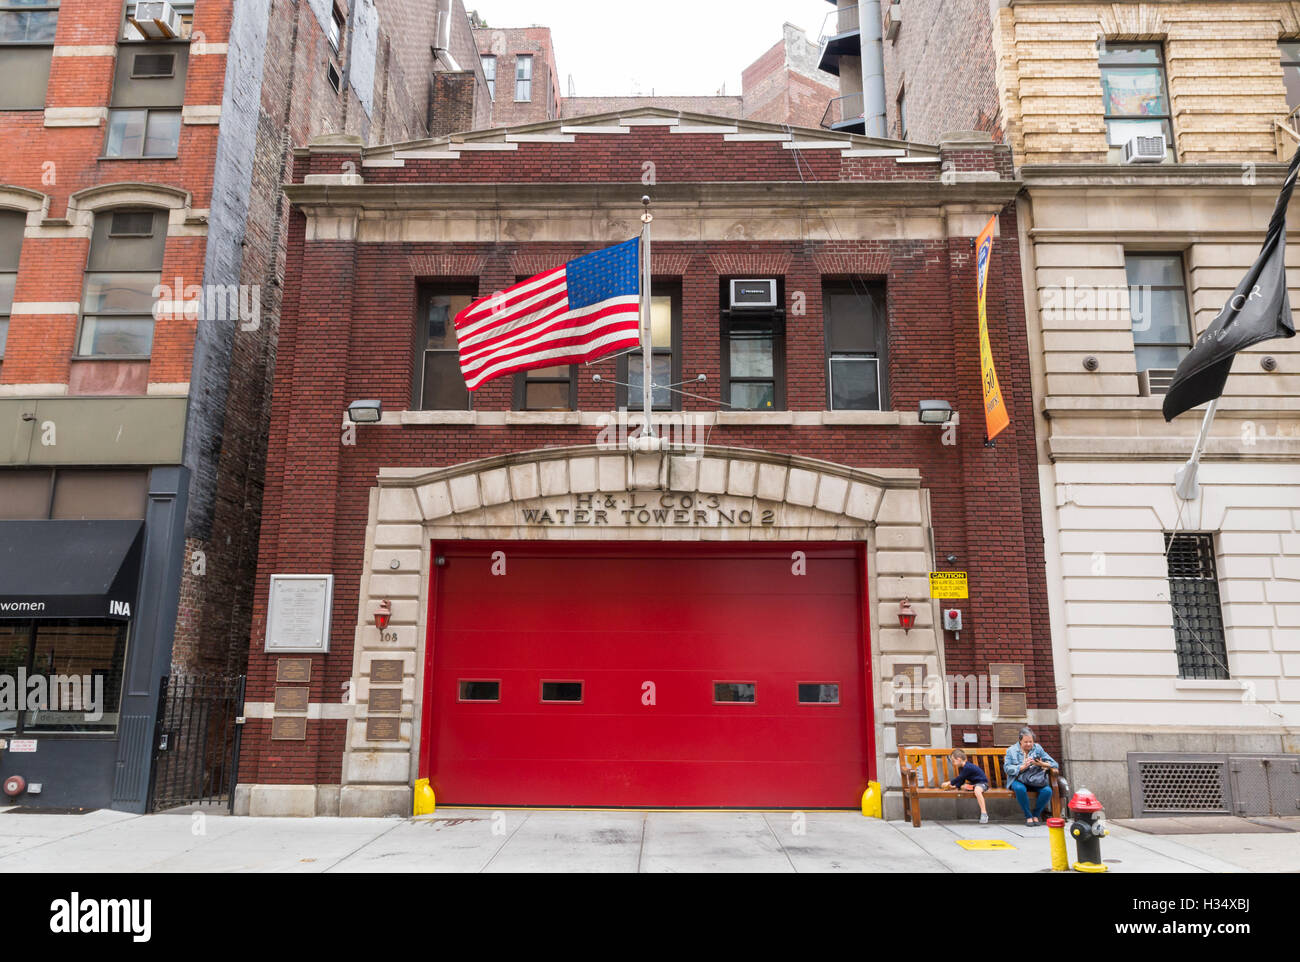 FDNY Hook and Ladder Company 3 Water Tower No 2 firehouse at 108 East 13th Street, New York Stock Photo